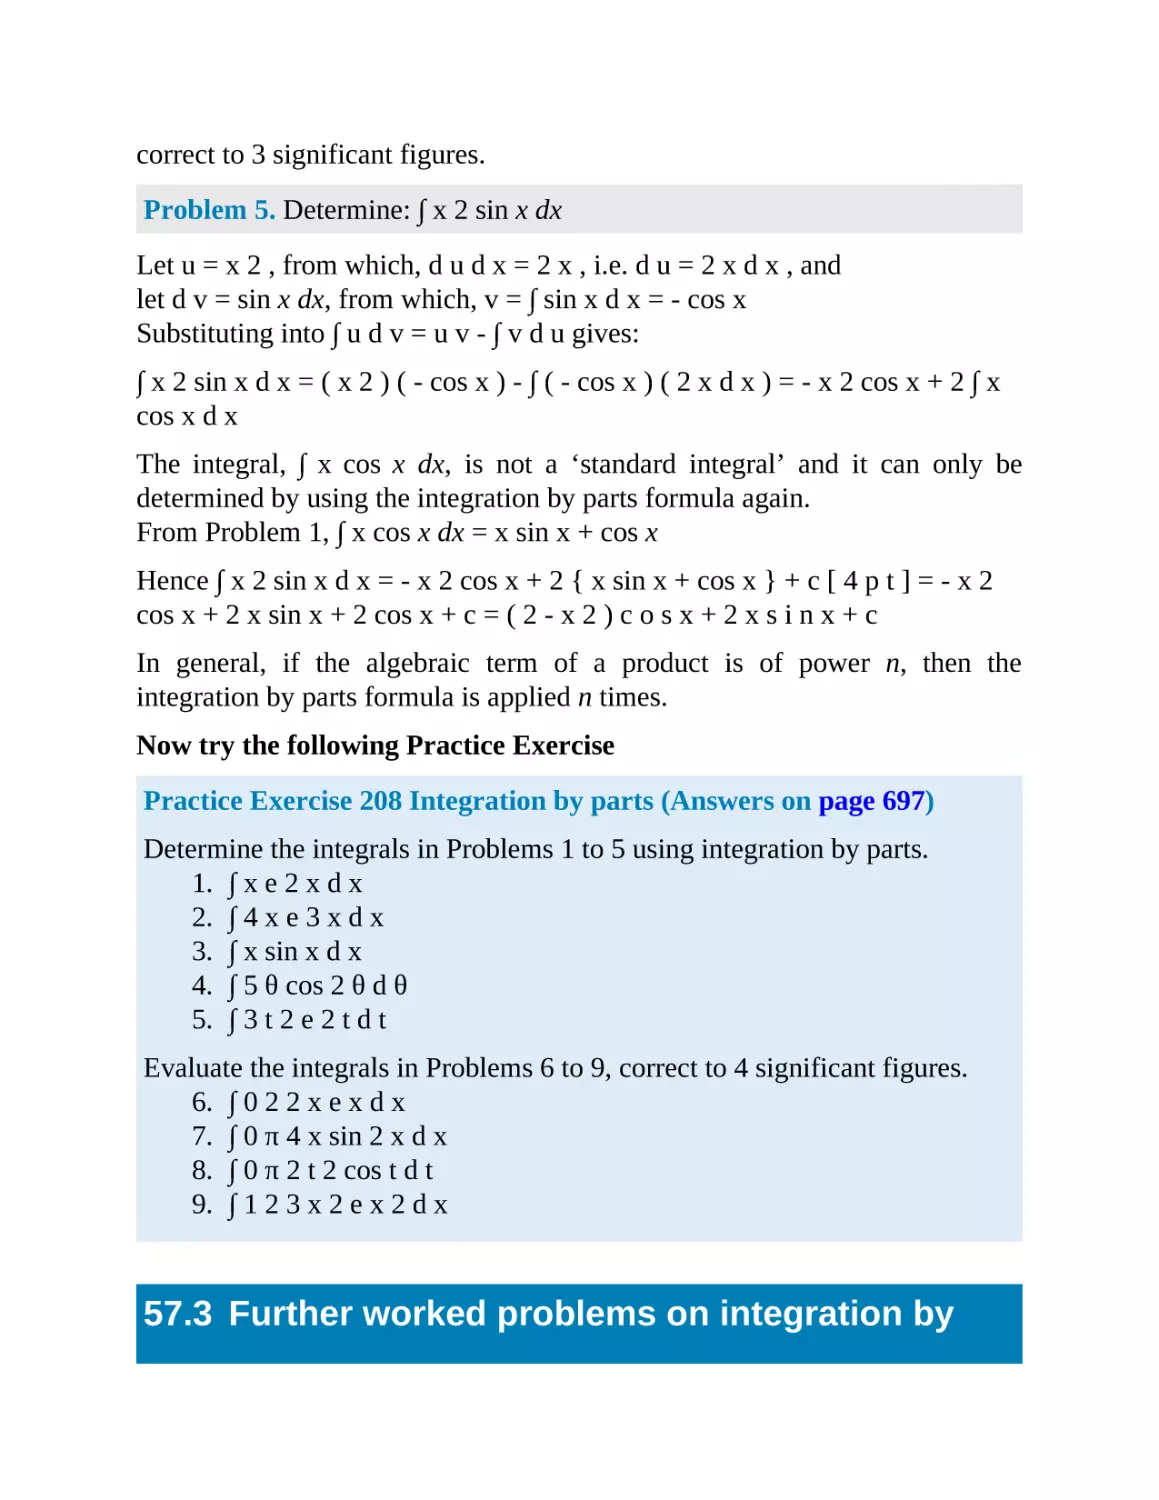 57.3 Further worked problems on integration by parts